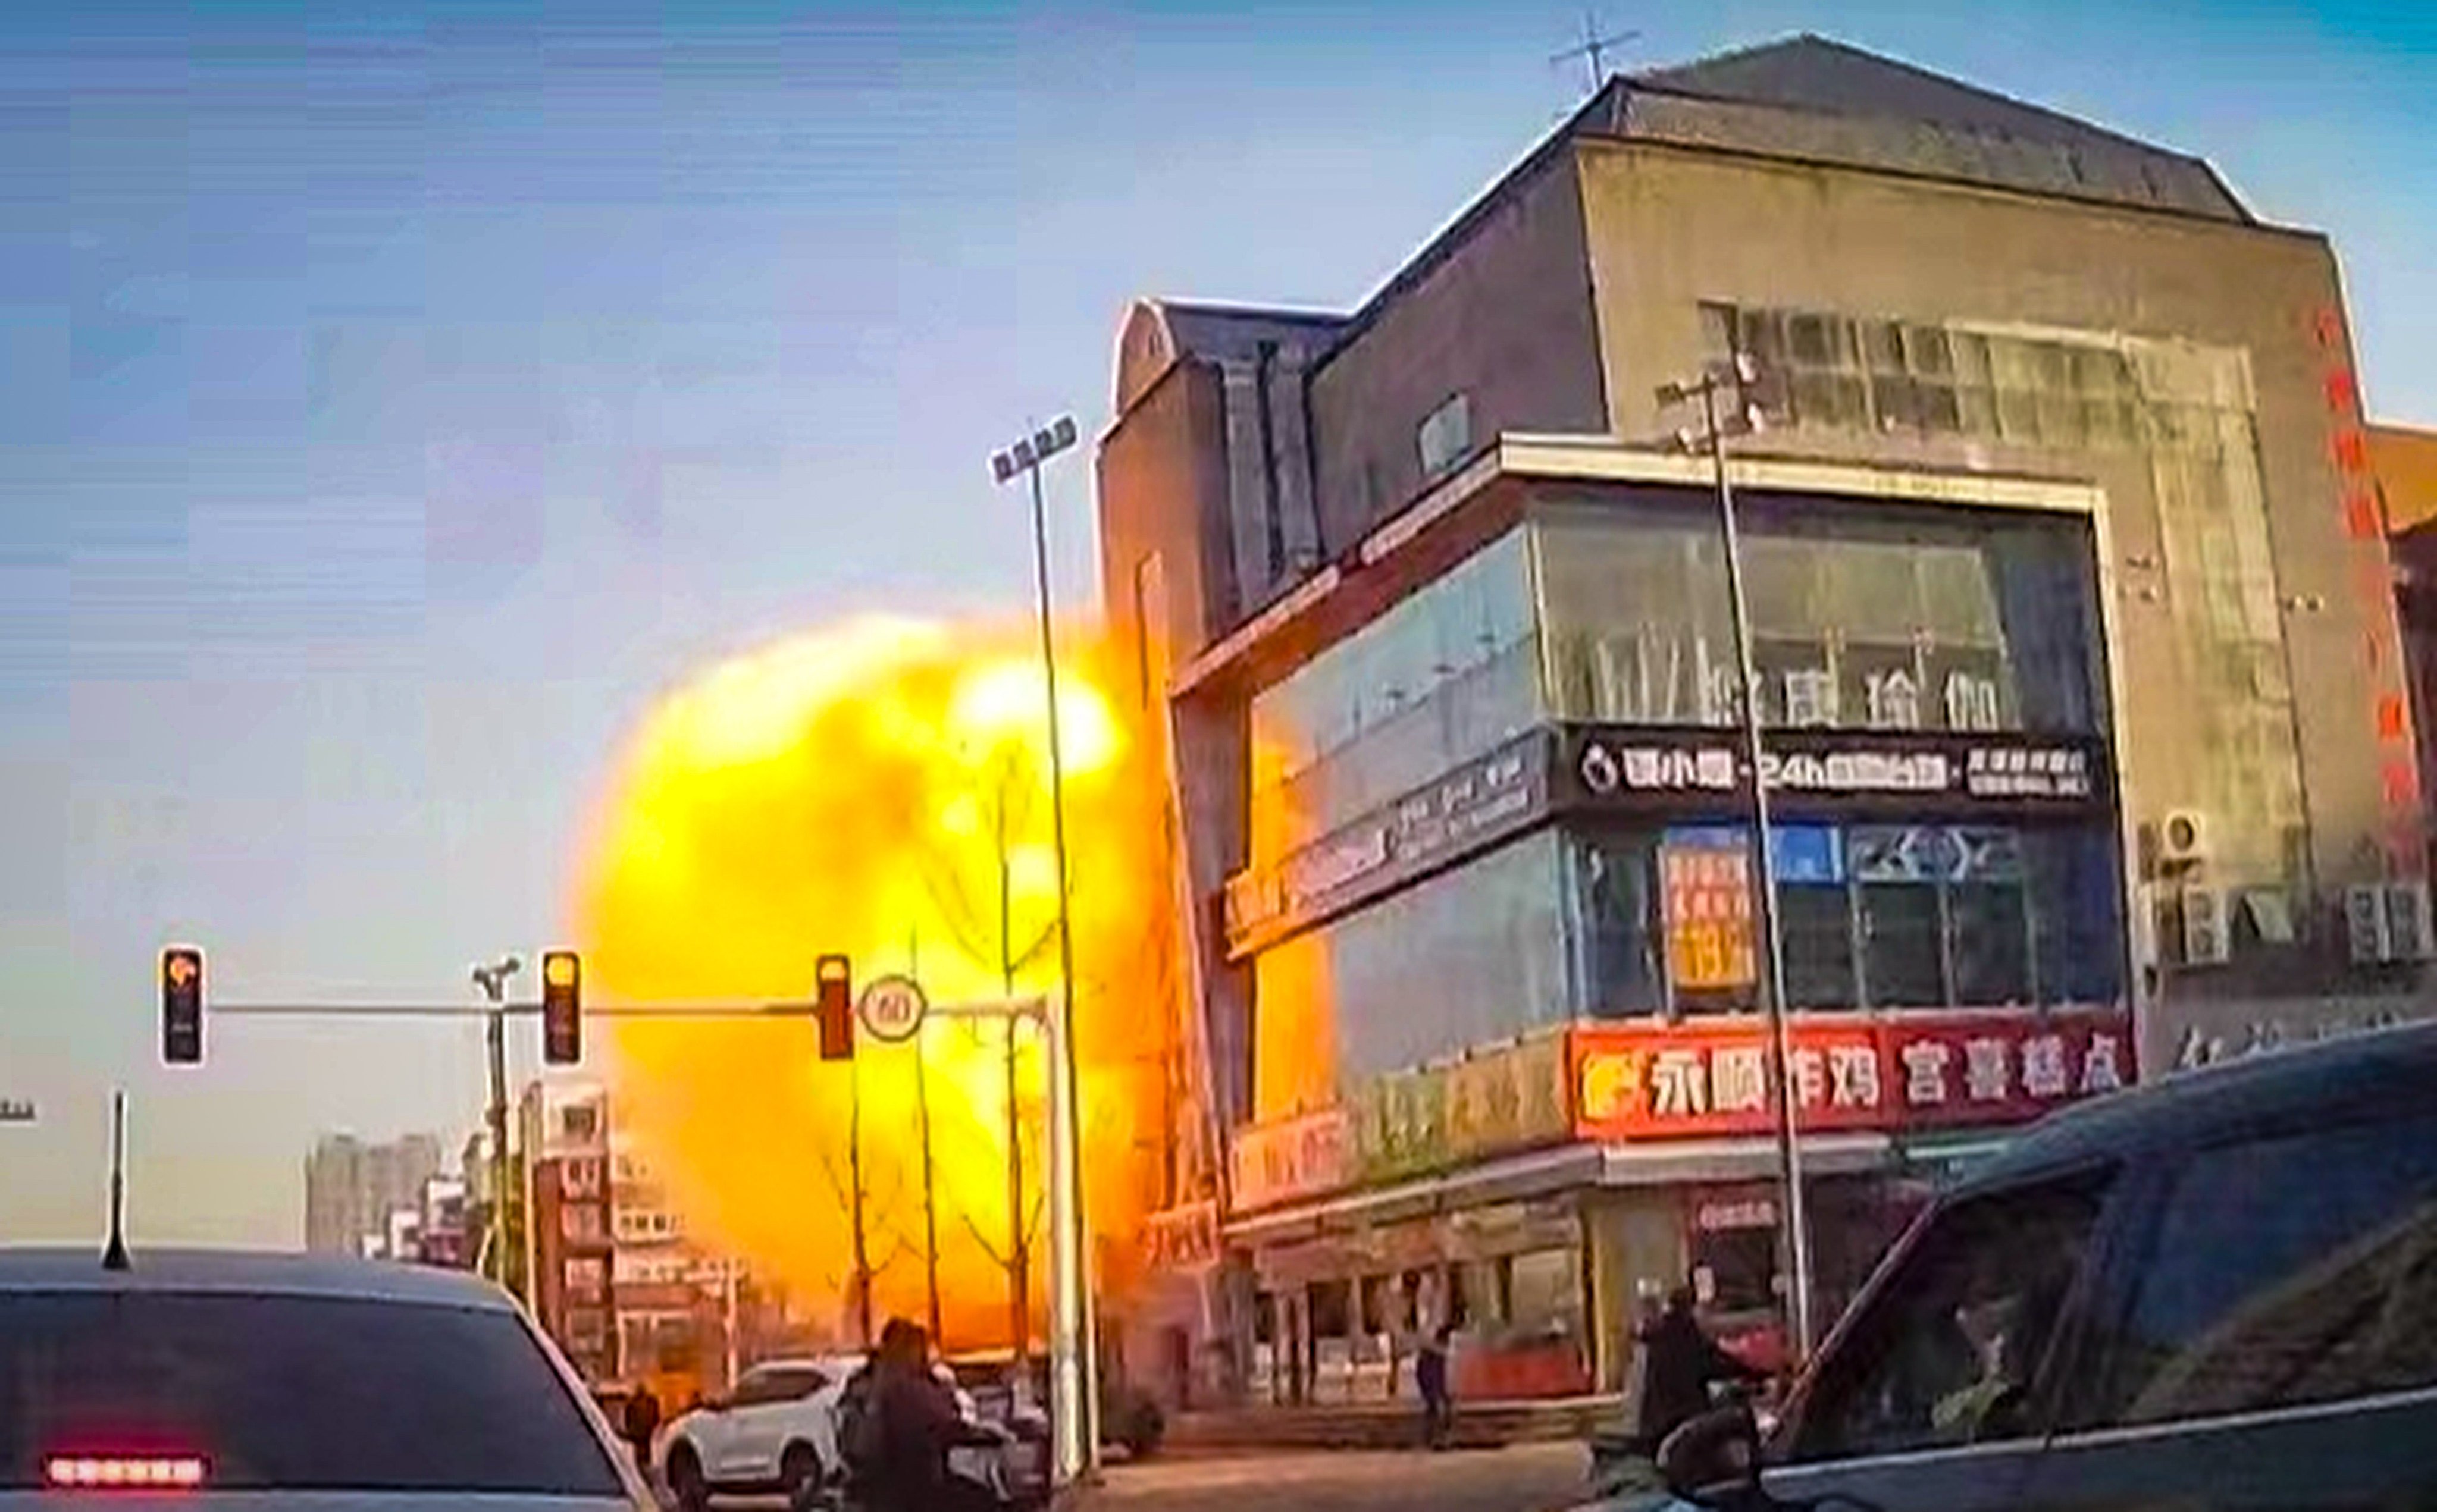 A blast in Yanjiao, Hebei province on Wednesday morning was caused by a gas leak. Photo: X/xinggugu597782